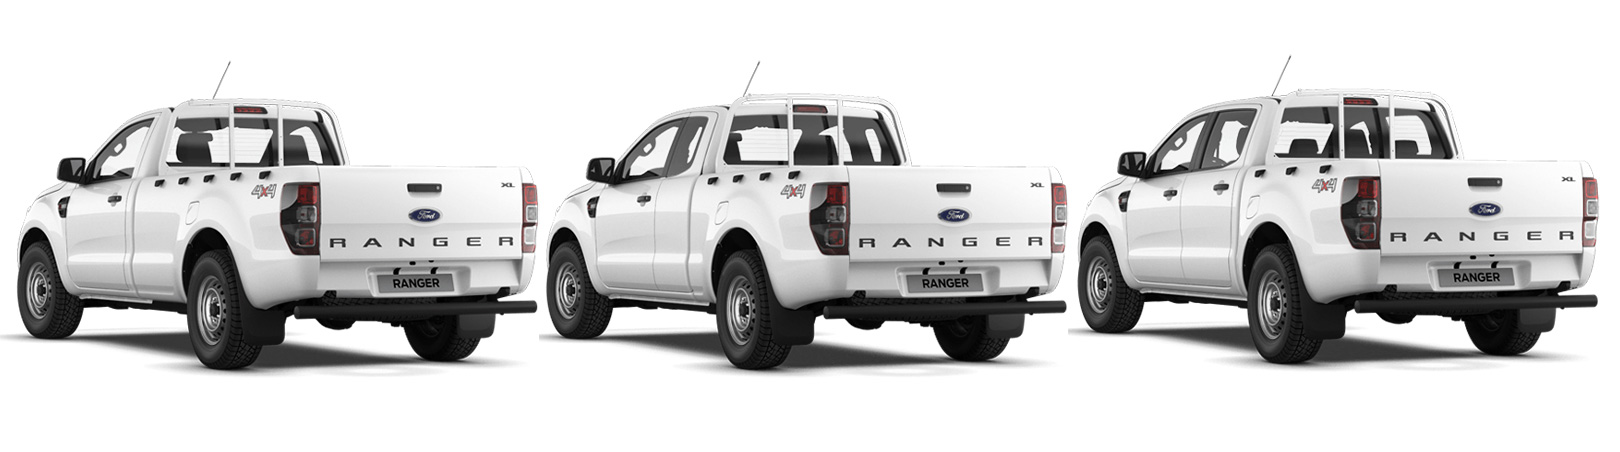 Ford Ranger: Single Cab, Super Cab and Double Cab